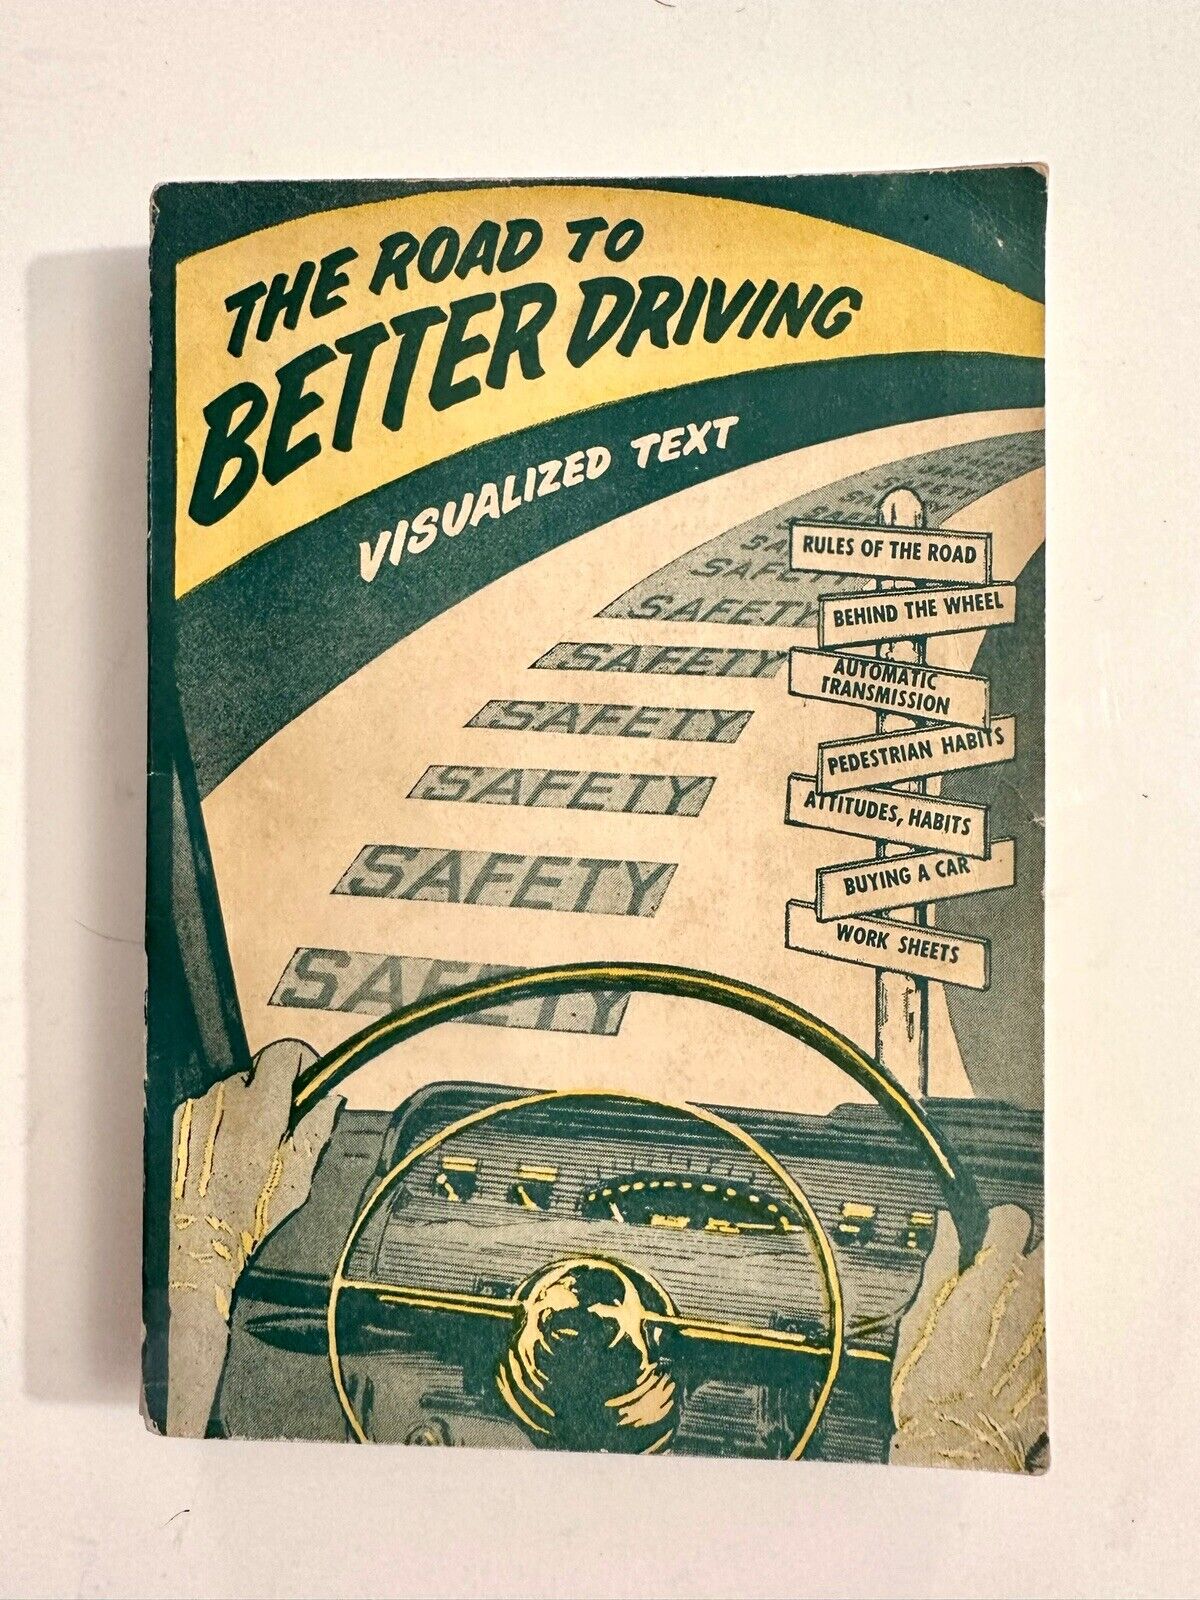 1956 Course THE ROAD TO BETTER DRIVING Visualized Text by White Retro NY Edition